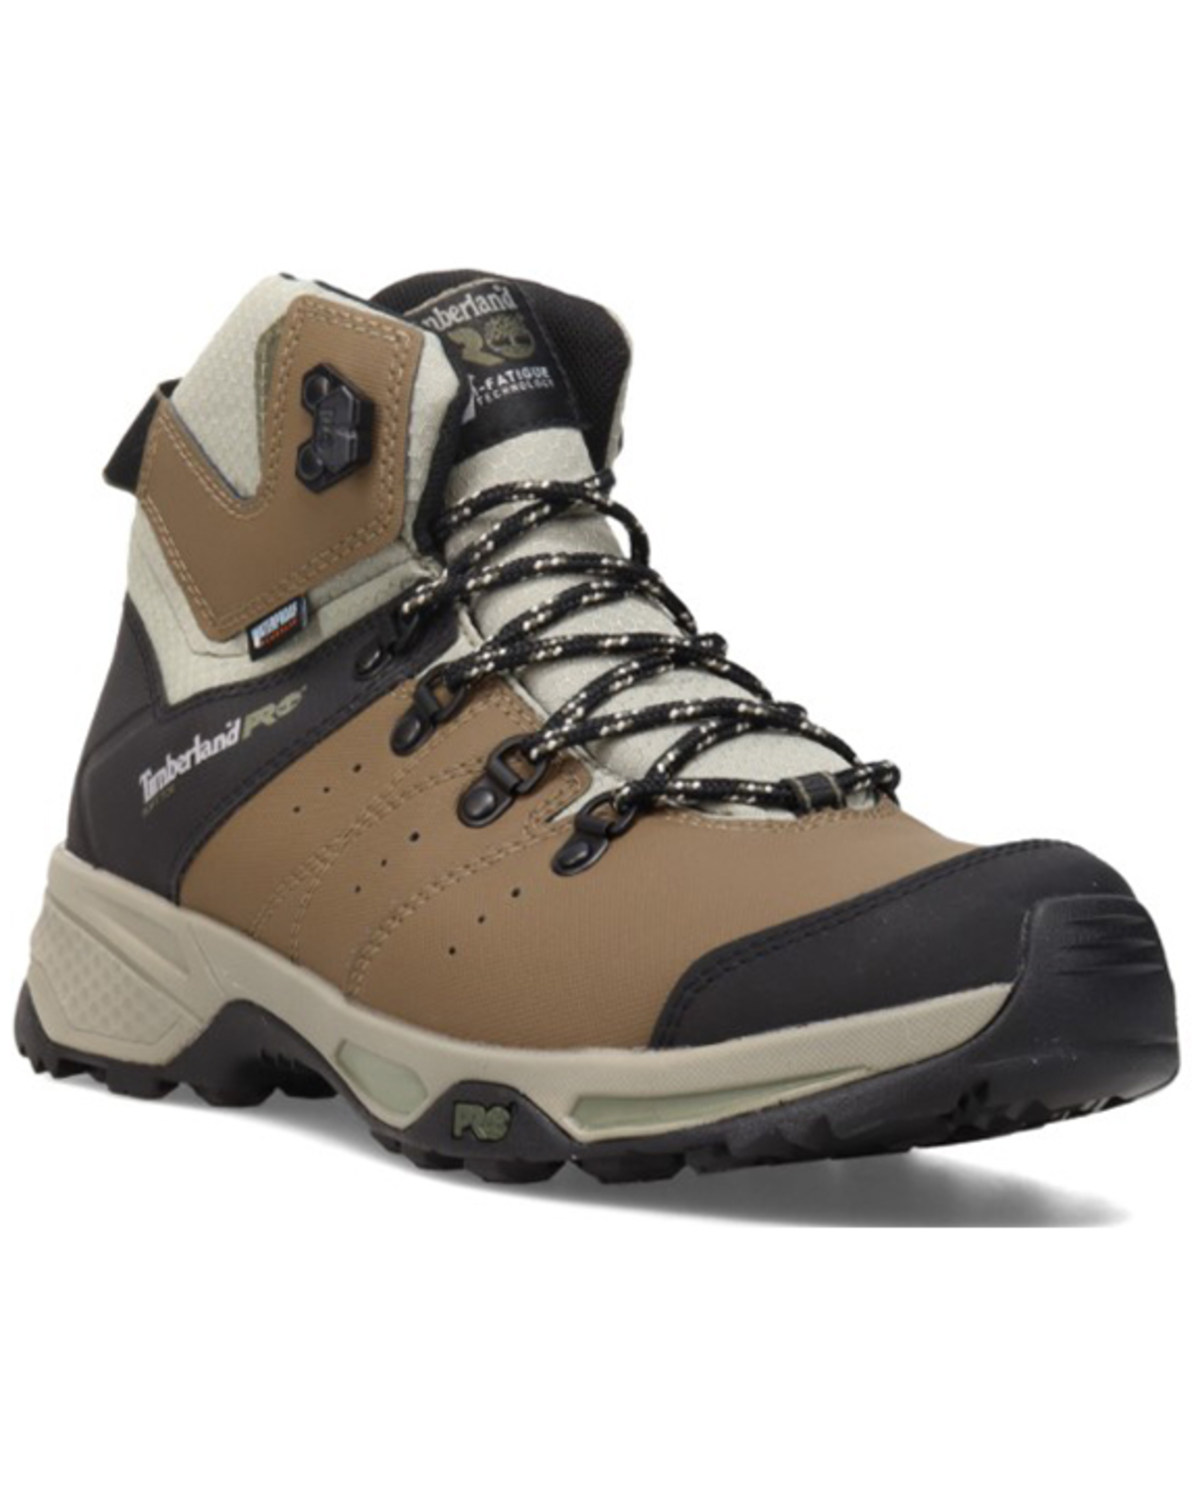 Timberland Men's Switchback Waterproof Lace-Up Hiking Work Boots - Soft Round Toe